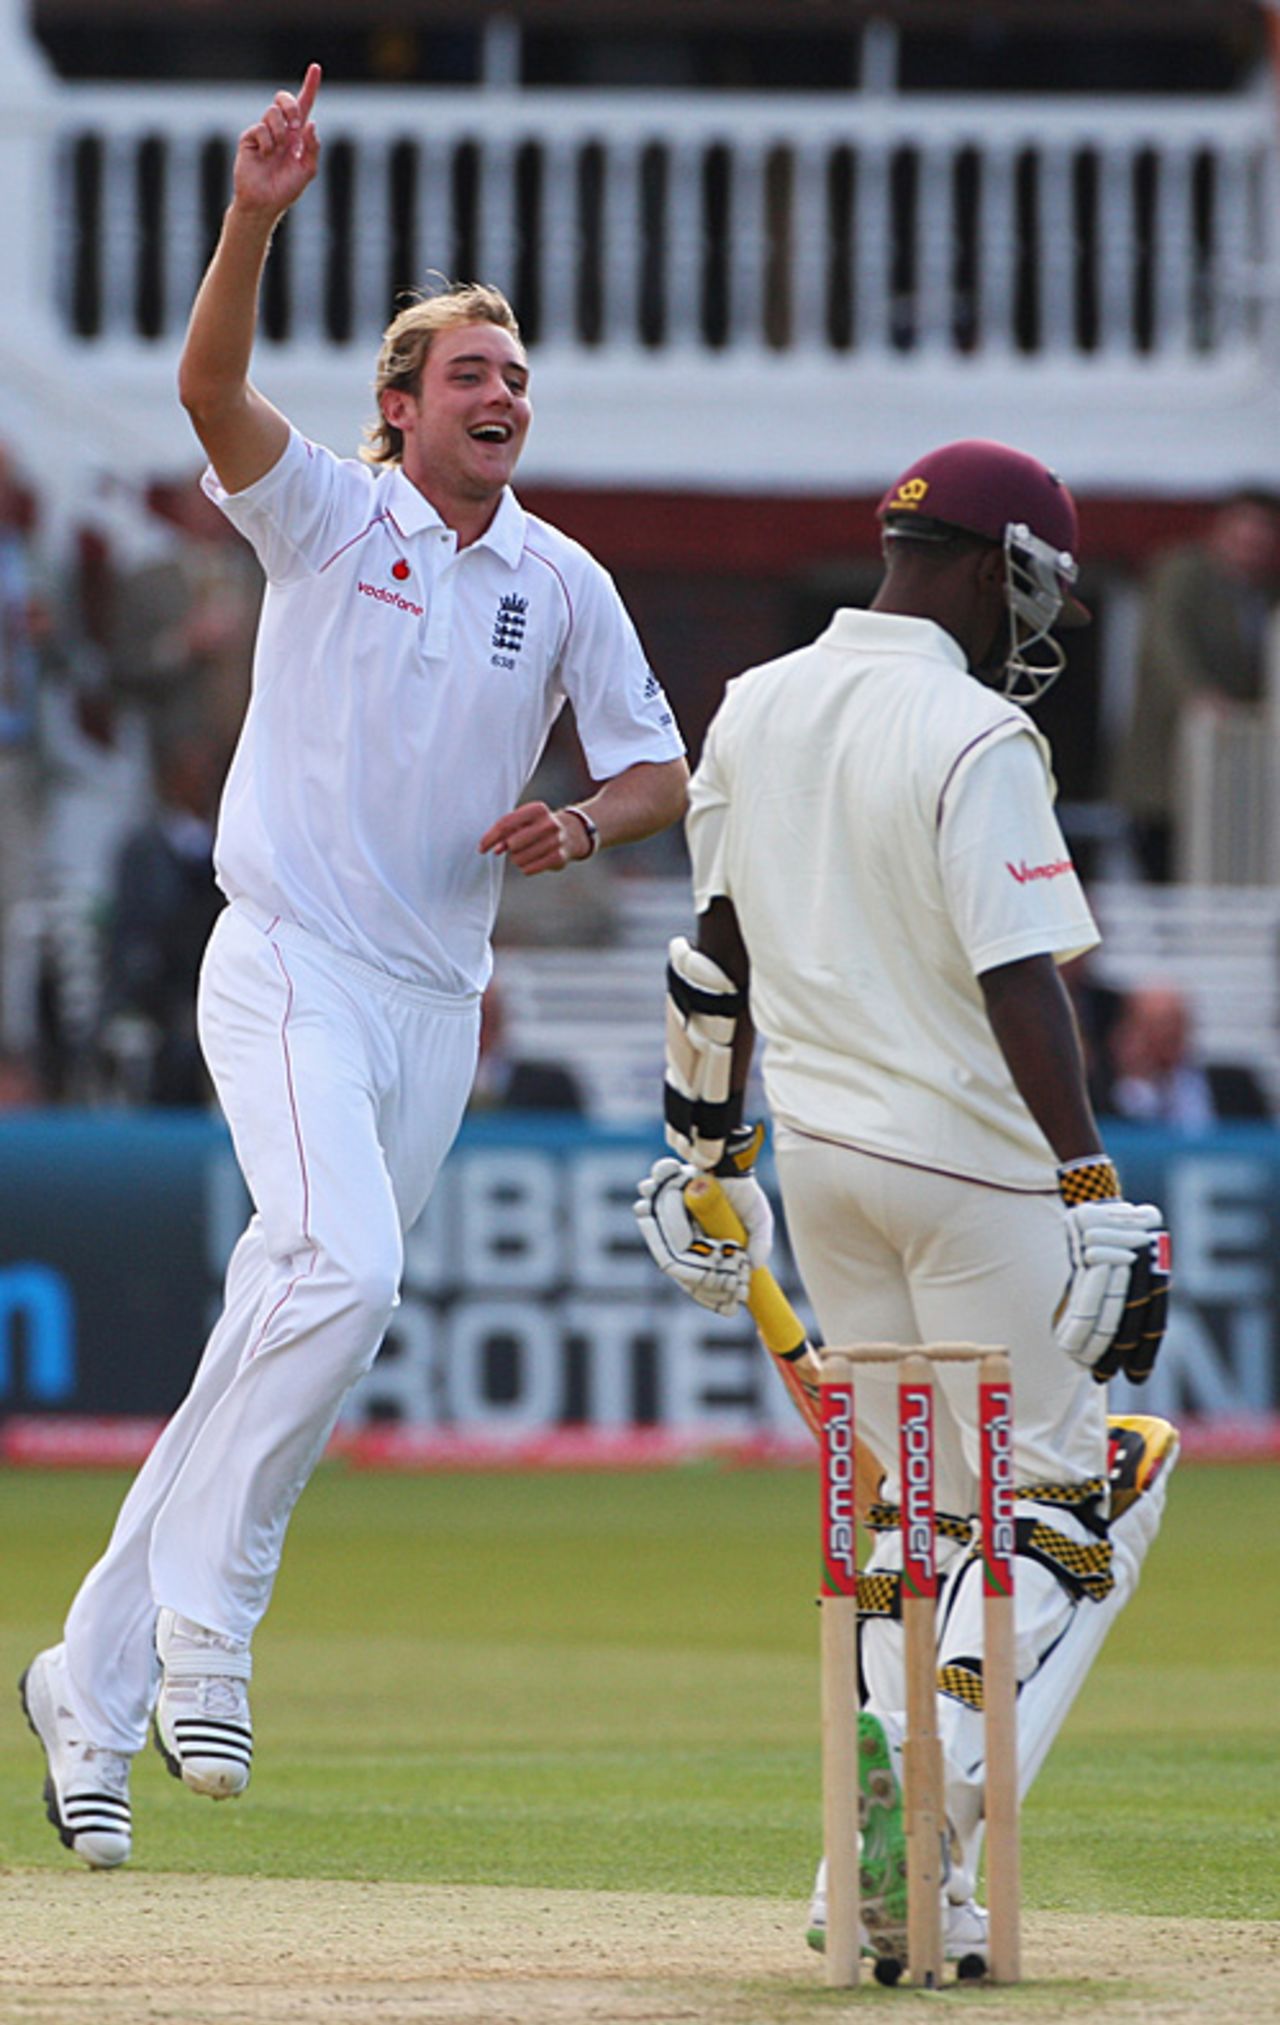 Stuart Broad celebrates the wicket of Fidel Edwards, England v West Indies, 1st Test, Lord's, May 8, 2009